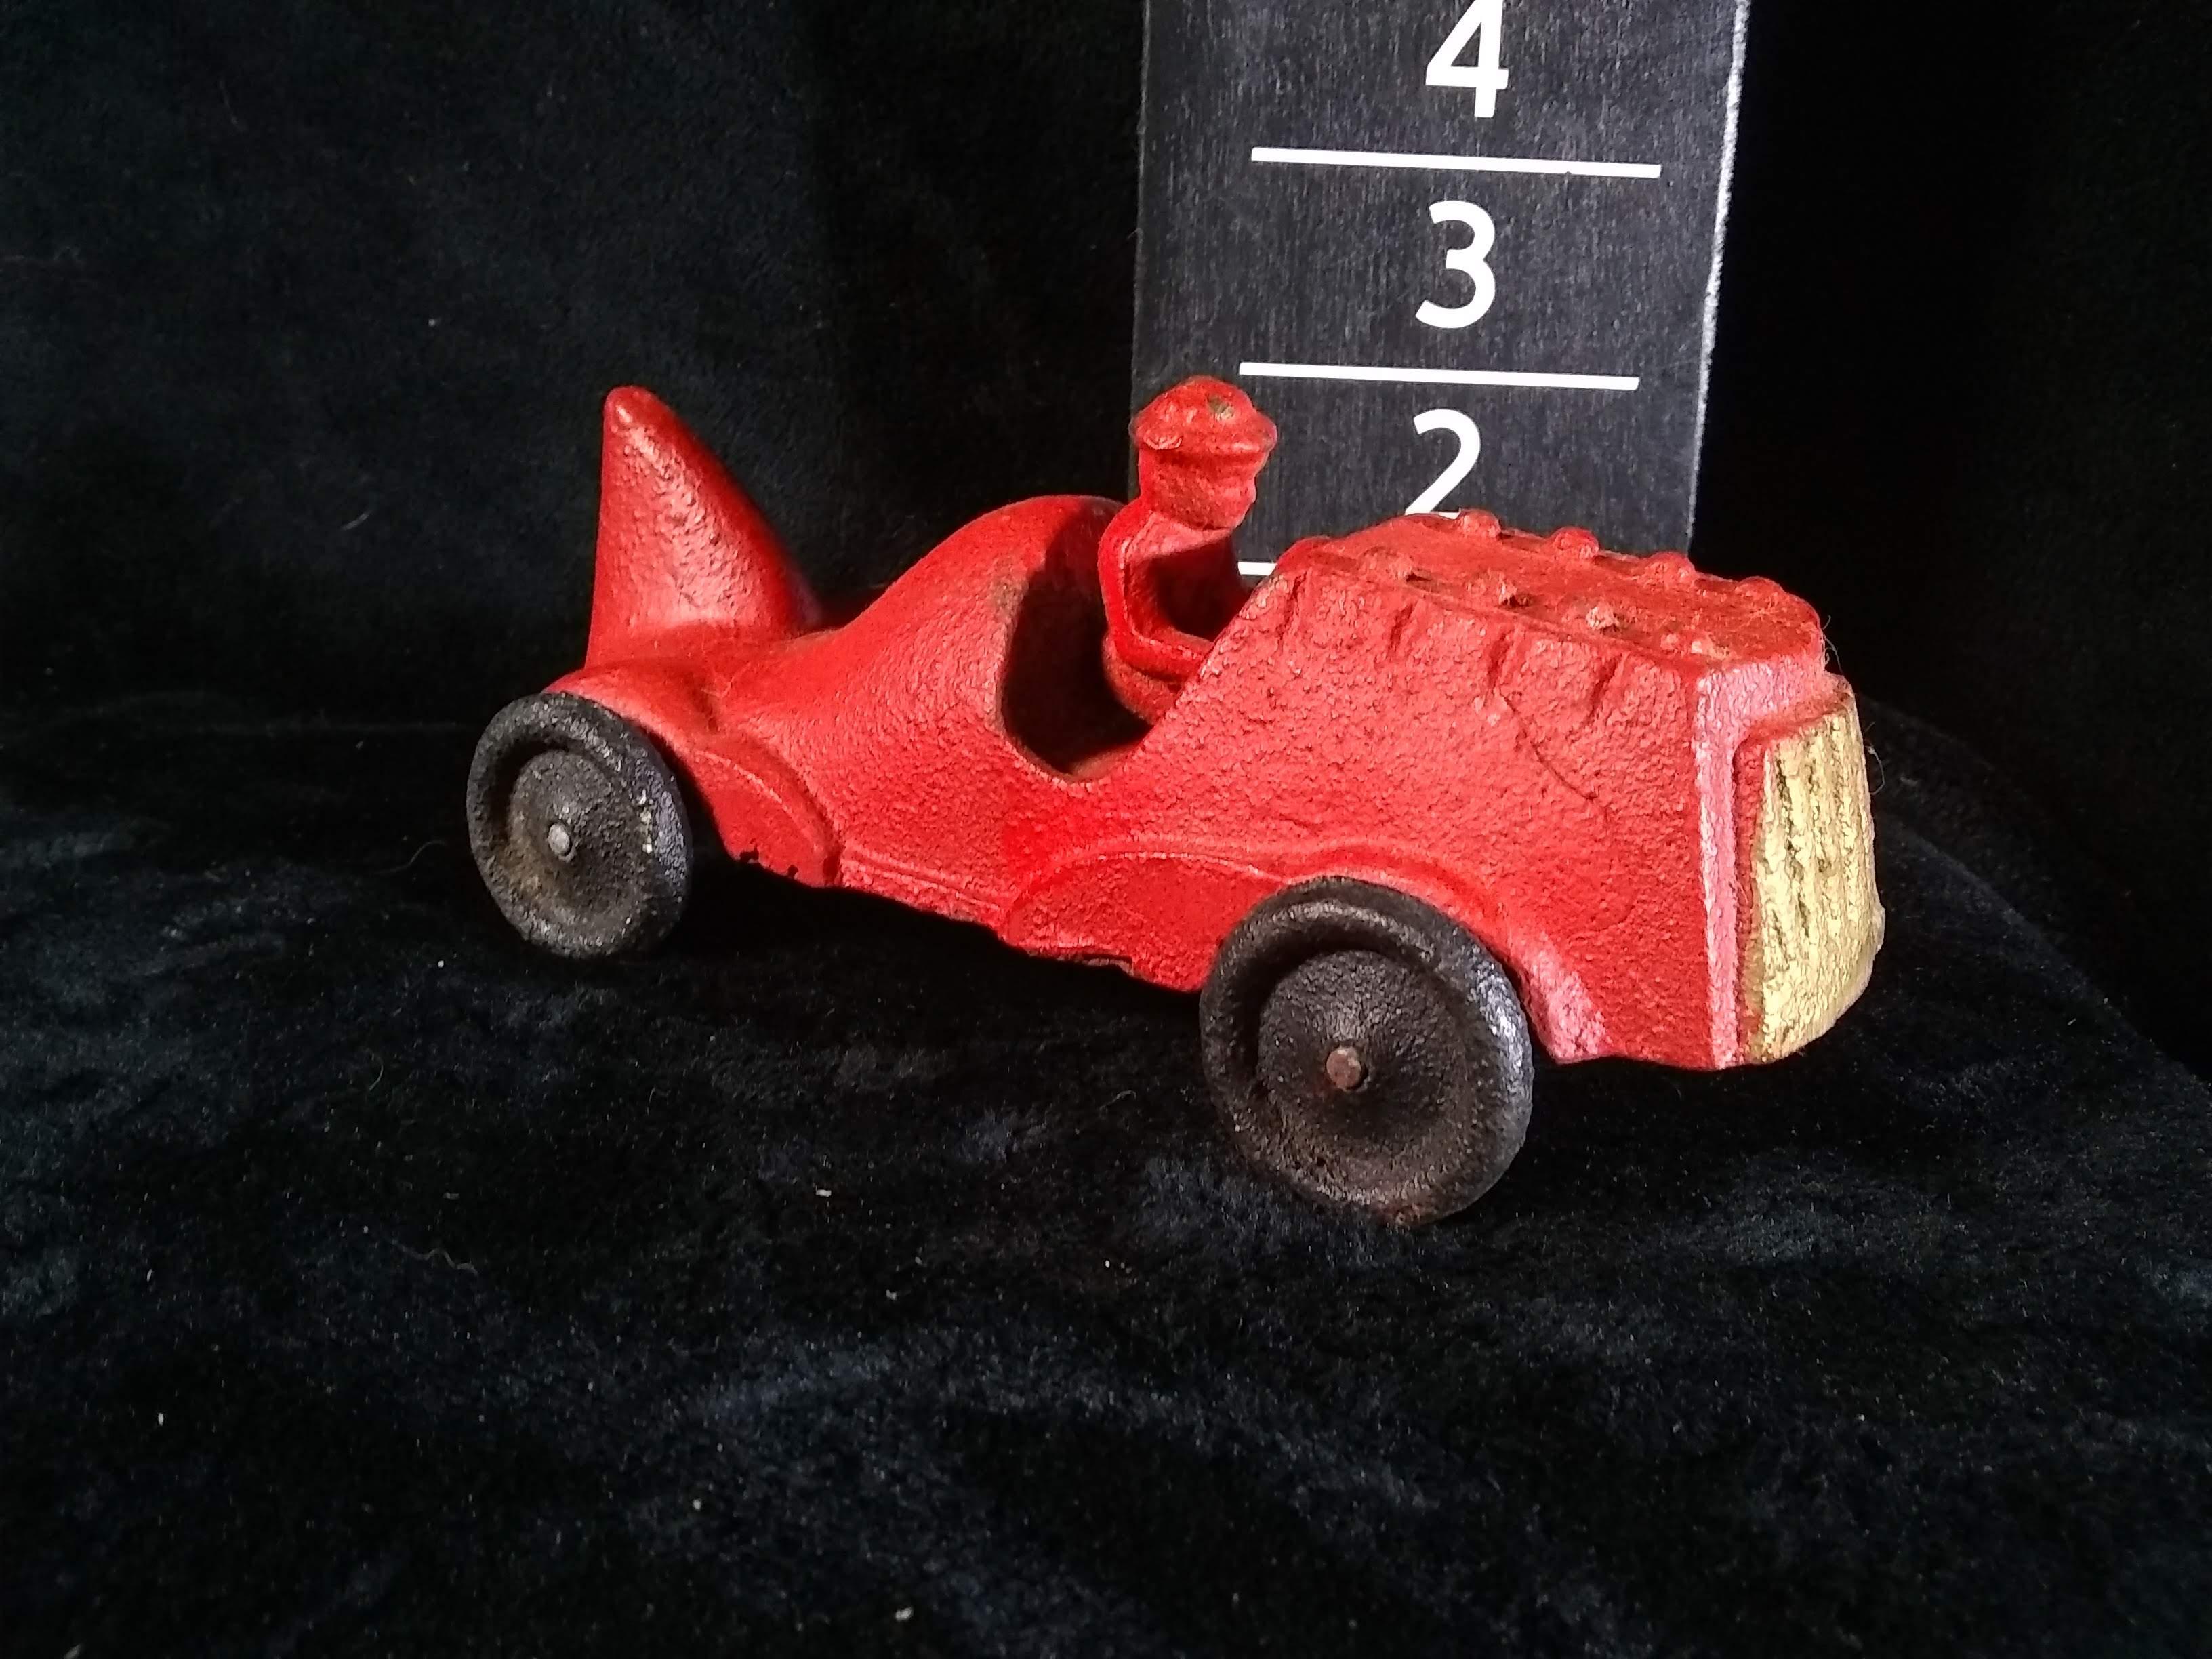 Cast Iron Toy -Red Finned Sports Car